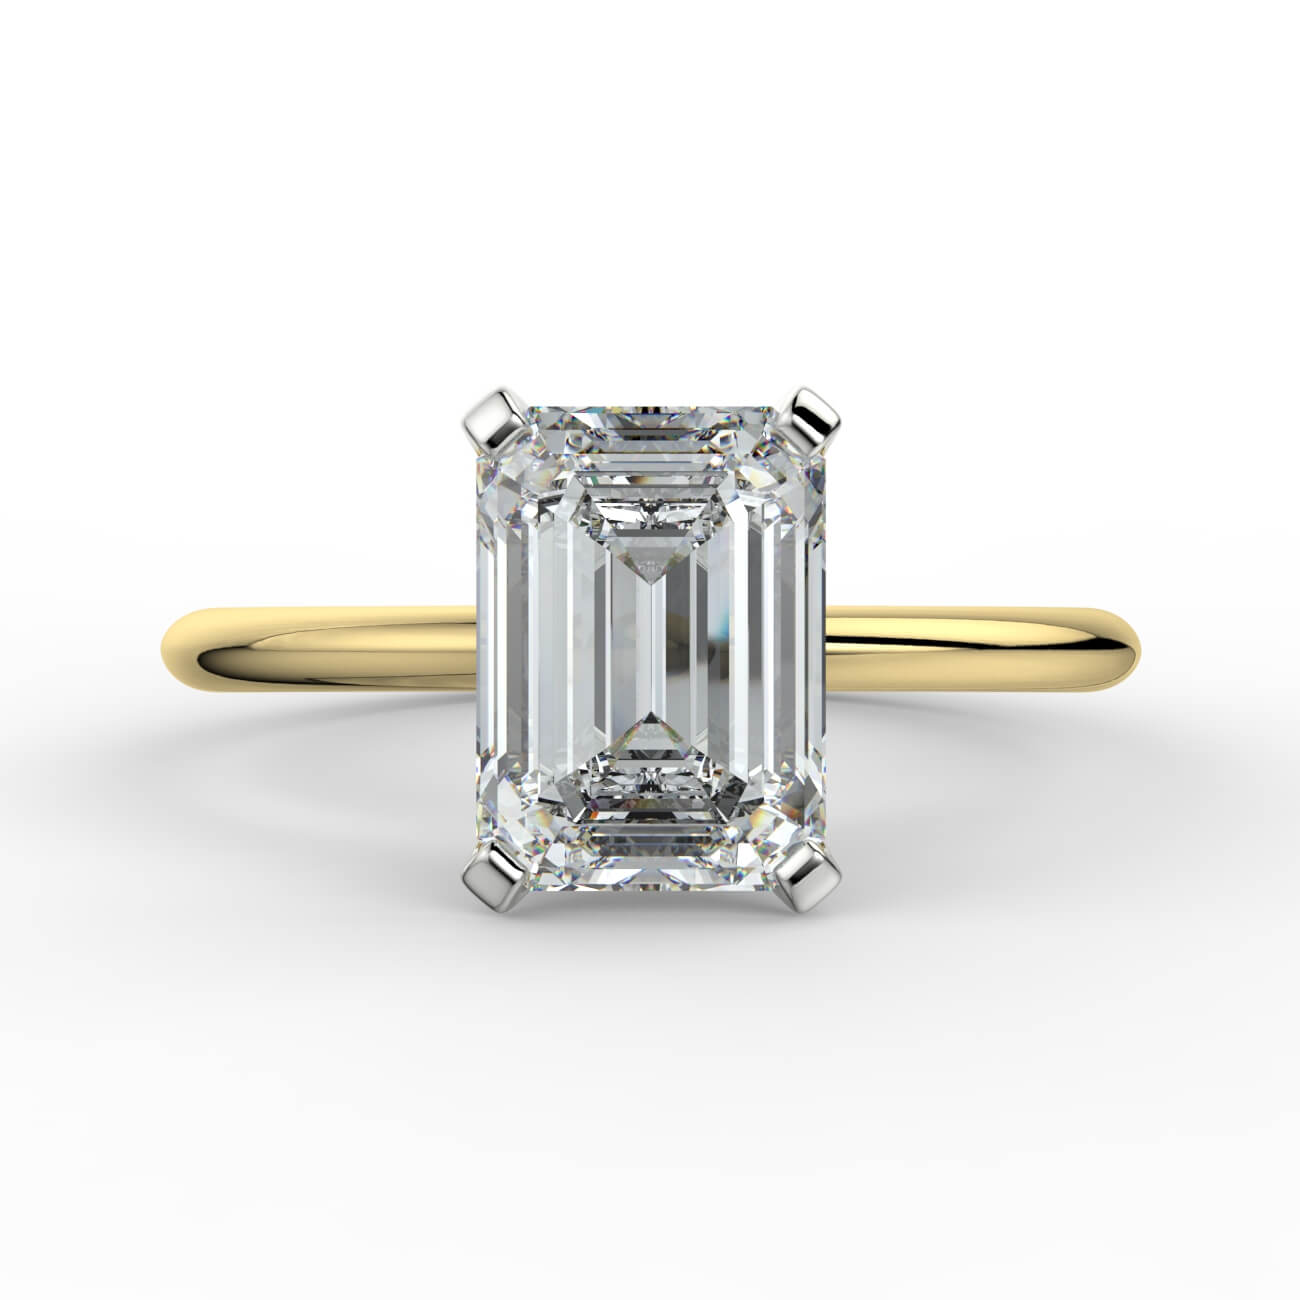 Knife-edge solitaire emerald cut diamond engagement ring in yellow and white gold – Australian Diamond Network